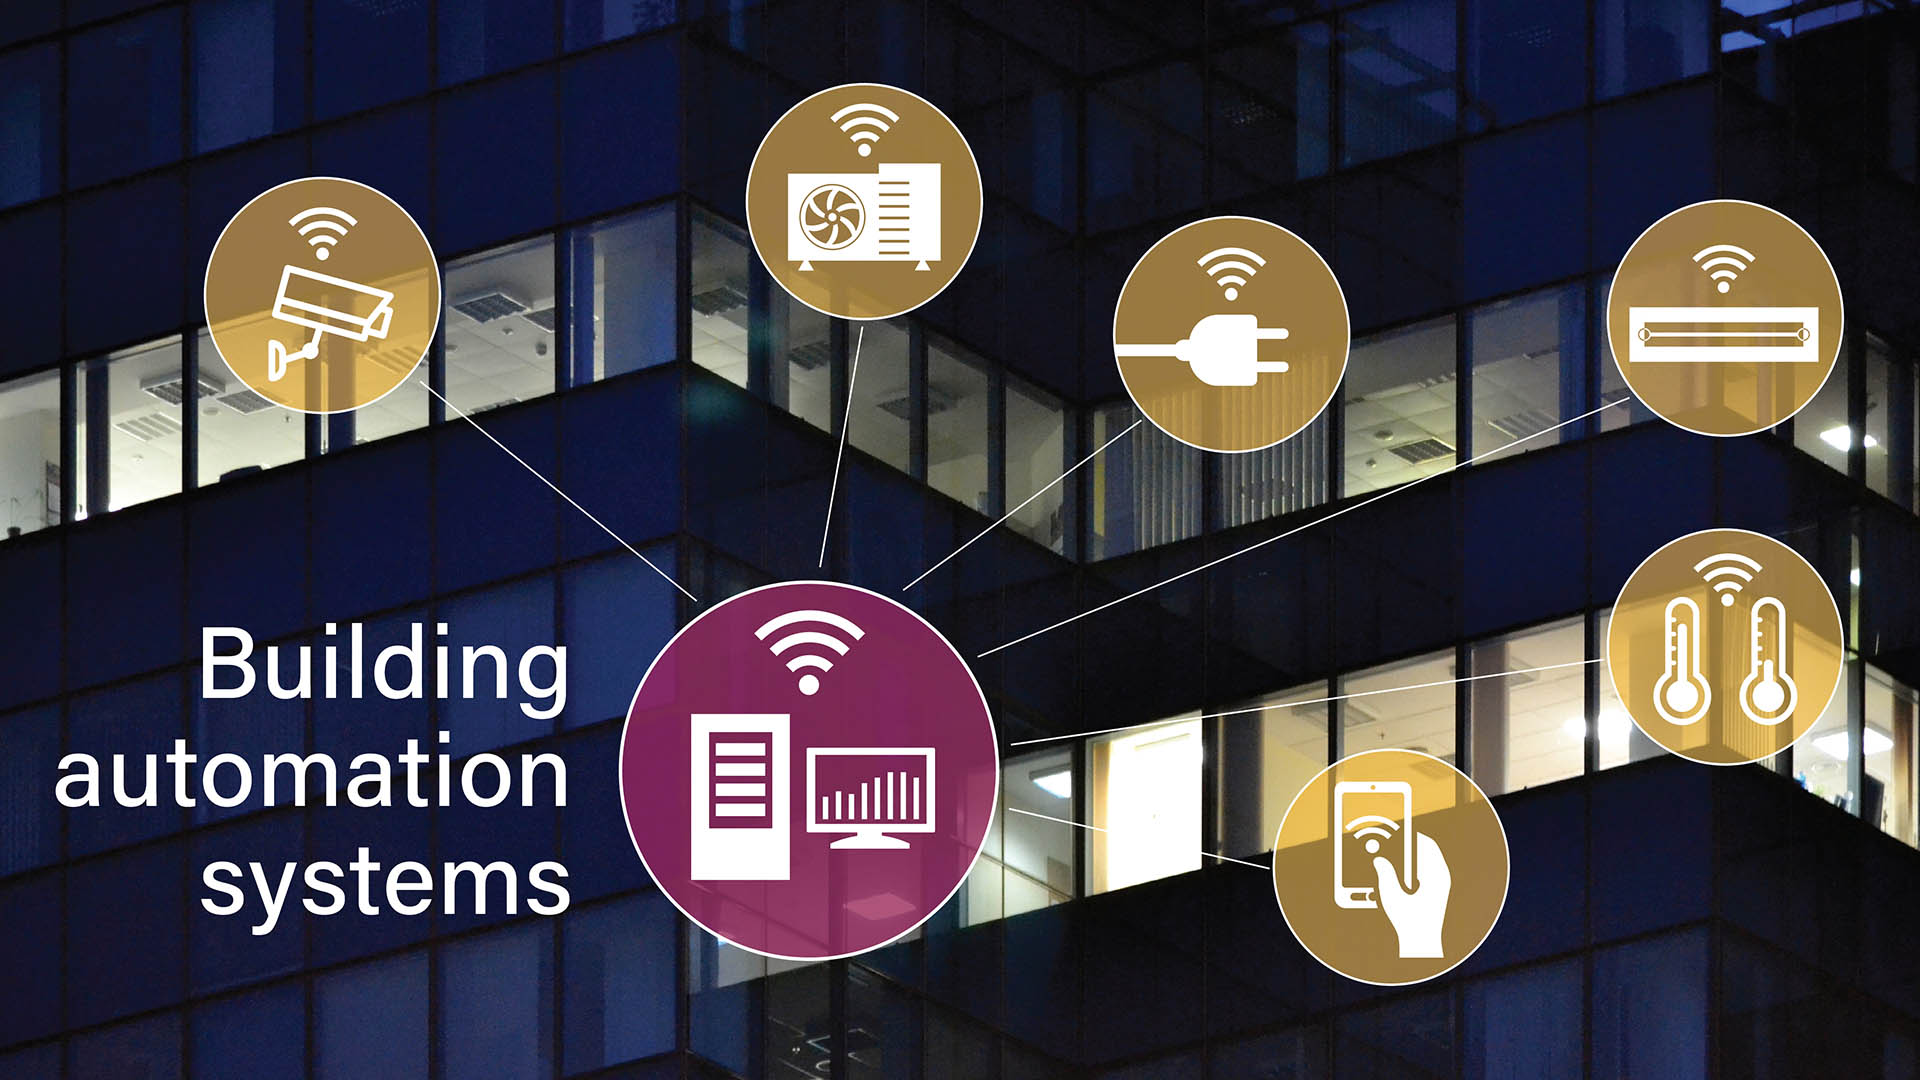 Take Control Your Building Automation System 